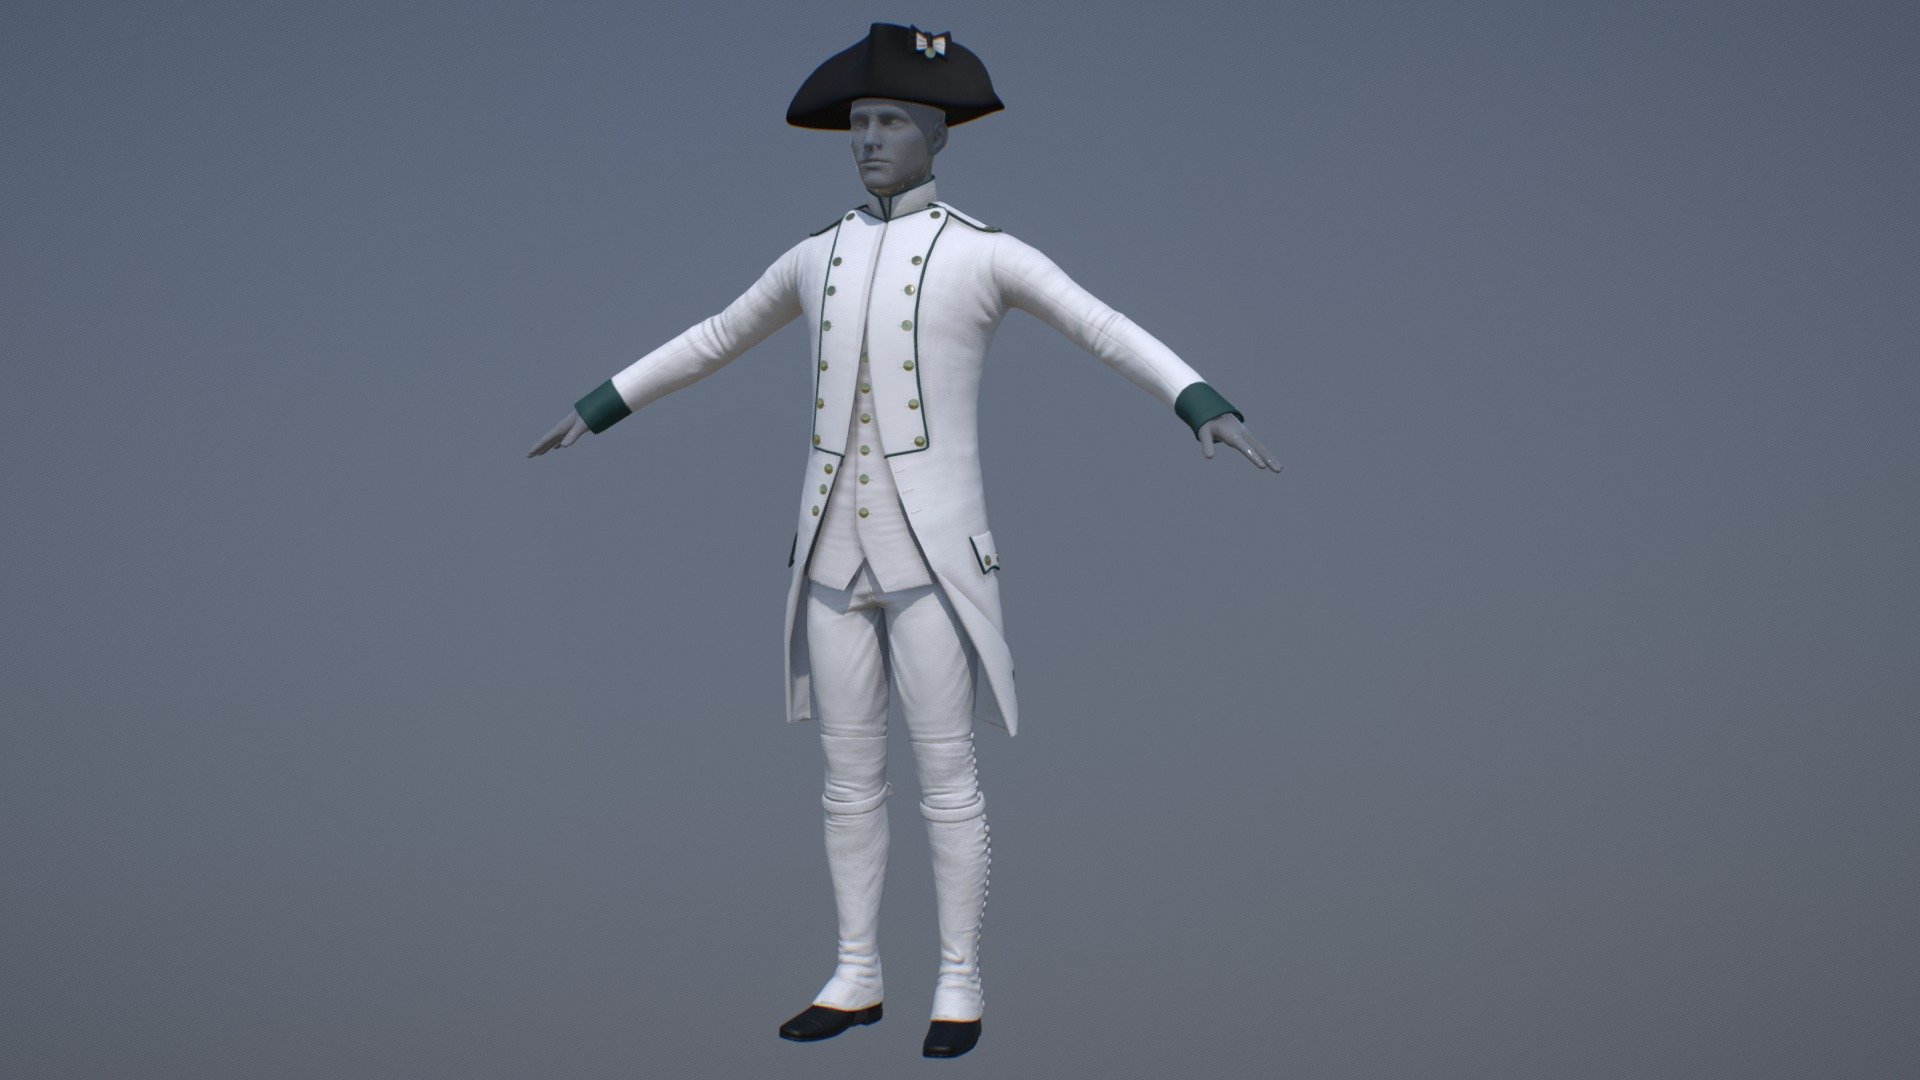 For Whigs and Tories videogame.
French fusilier from 85th regiment circa 1779 when they were sent to the North America as part of Rochambeau’s expeditionary force.
Modelled in 3ds and ZBrush, textured in Substance Painter with tweaks in Photoshop.
https://www.indiedb.com/games/whigs-tories - 85th line infantry regiment fusilier 3d model